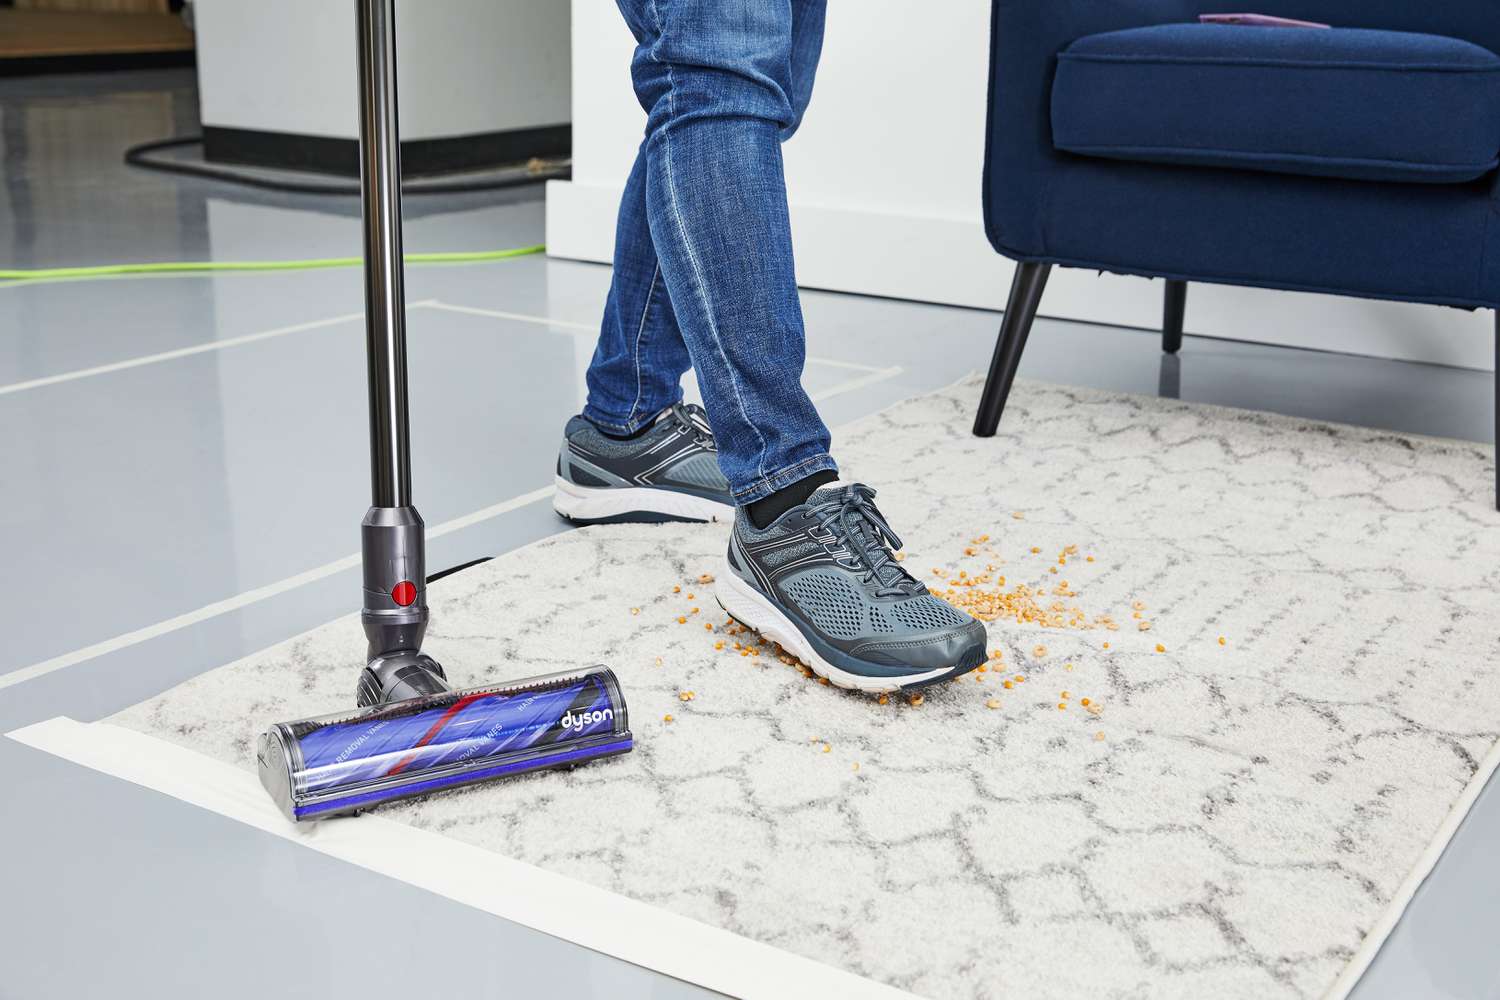 A foot stepping on crumbs on a rug with the Dyson V12 Detect Slim beside it